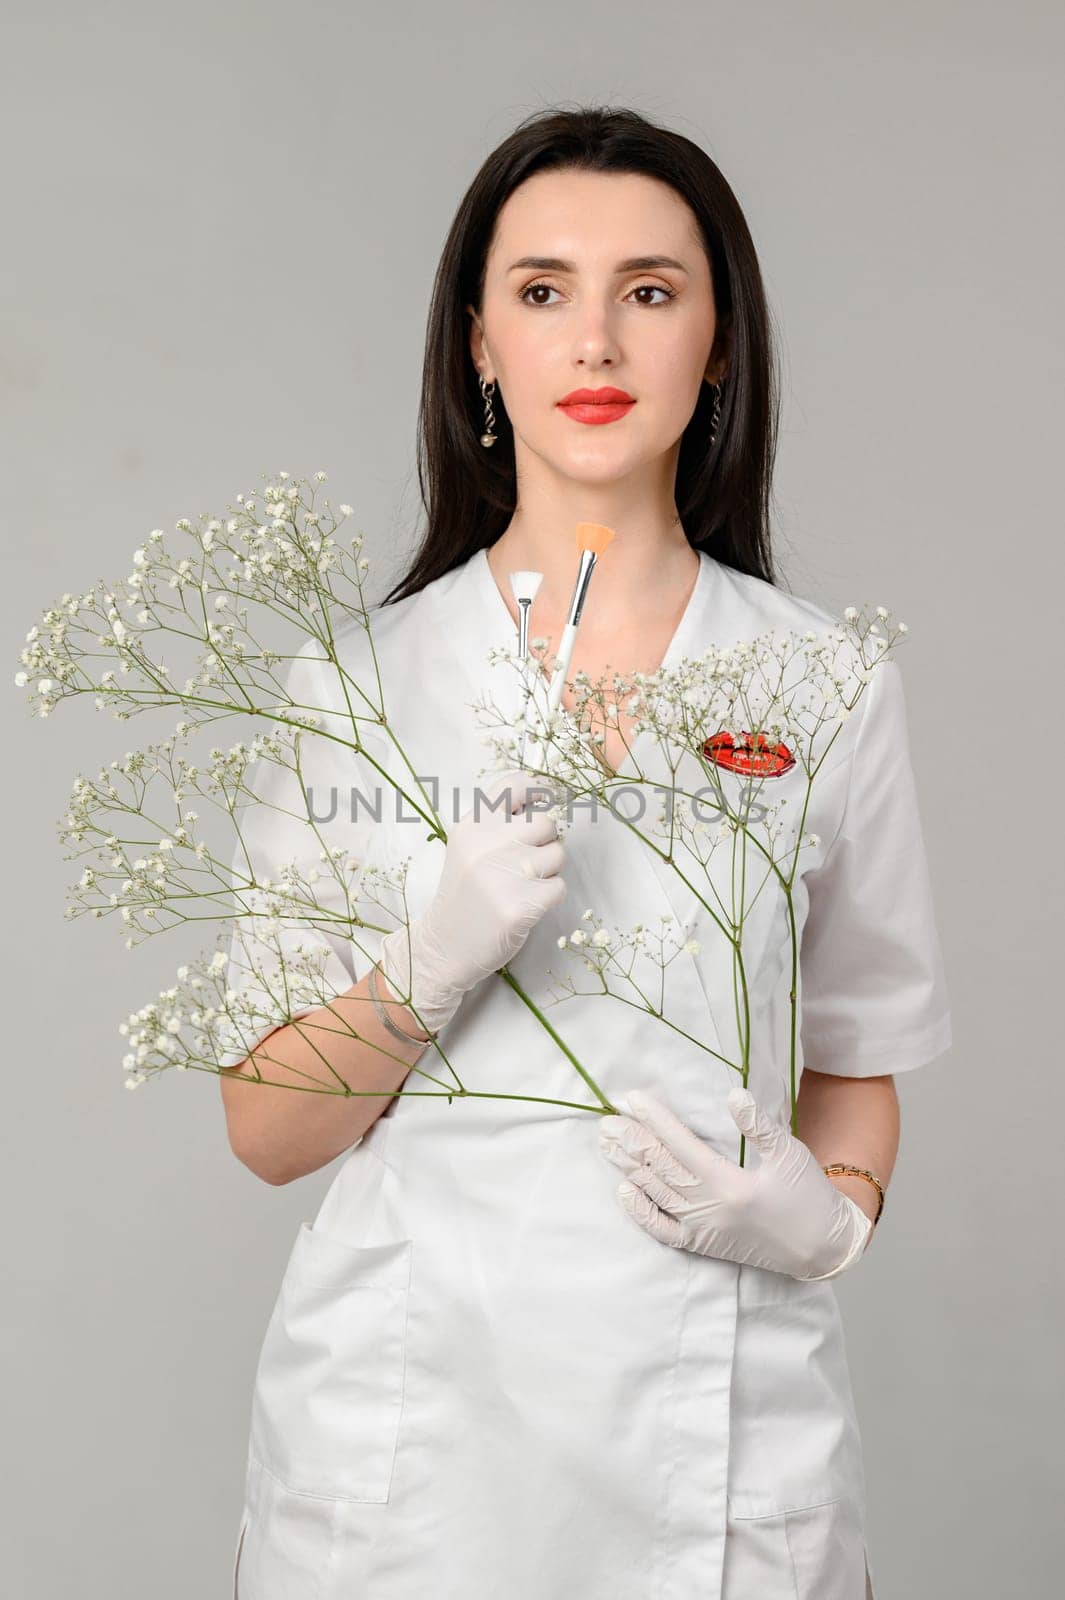 the girl holds two brushes in her hands on a white background, the girl is a beautician in white disposable gloves.